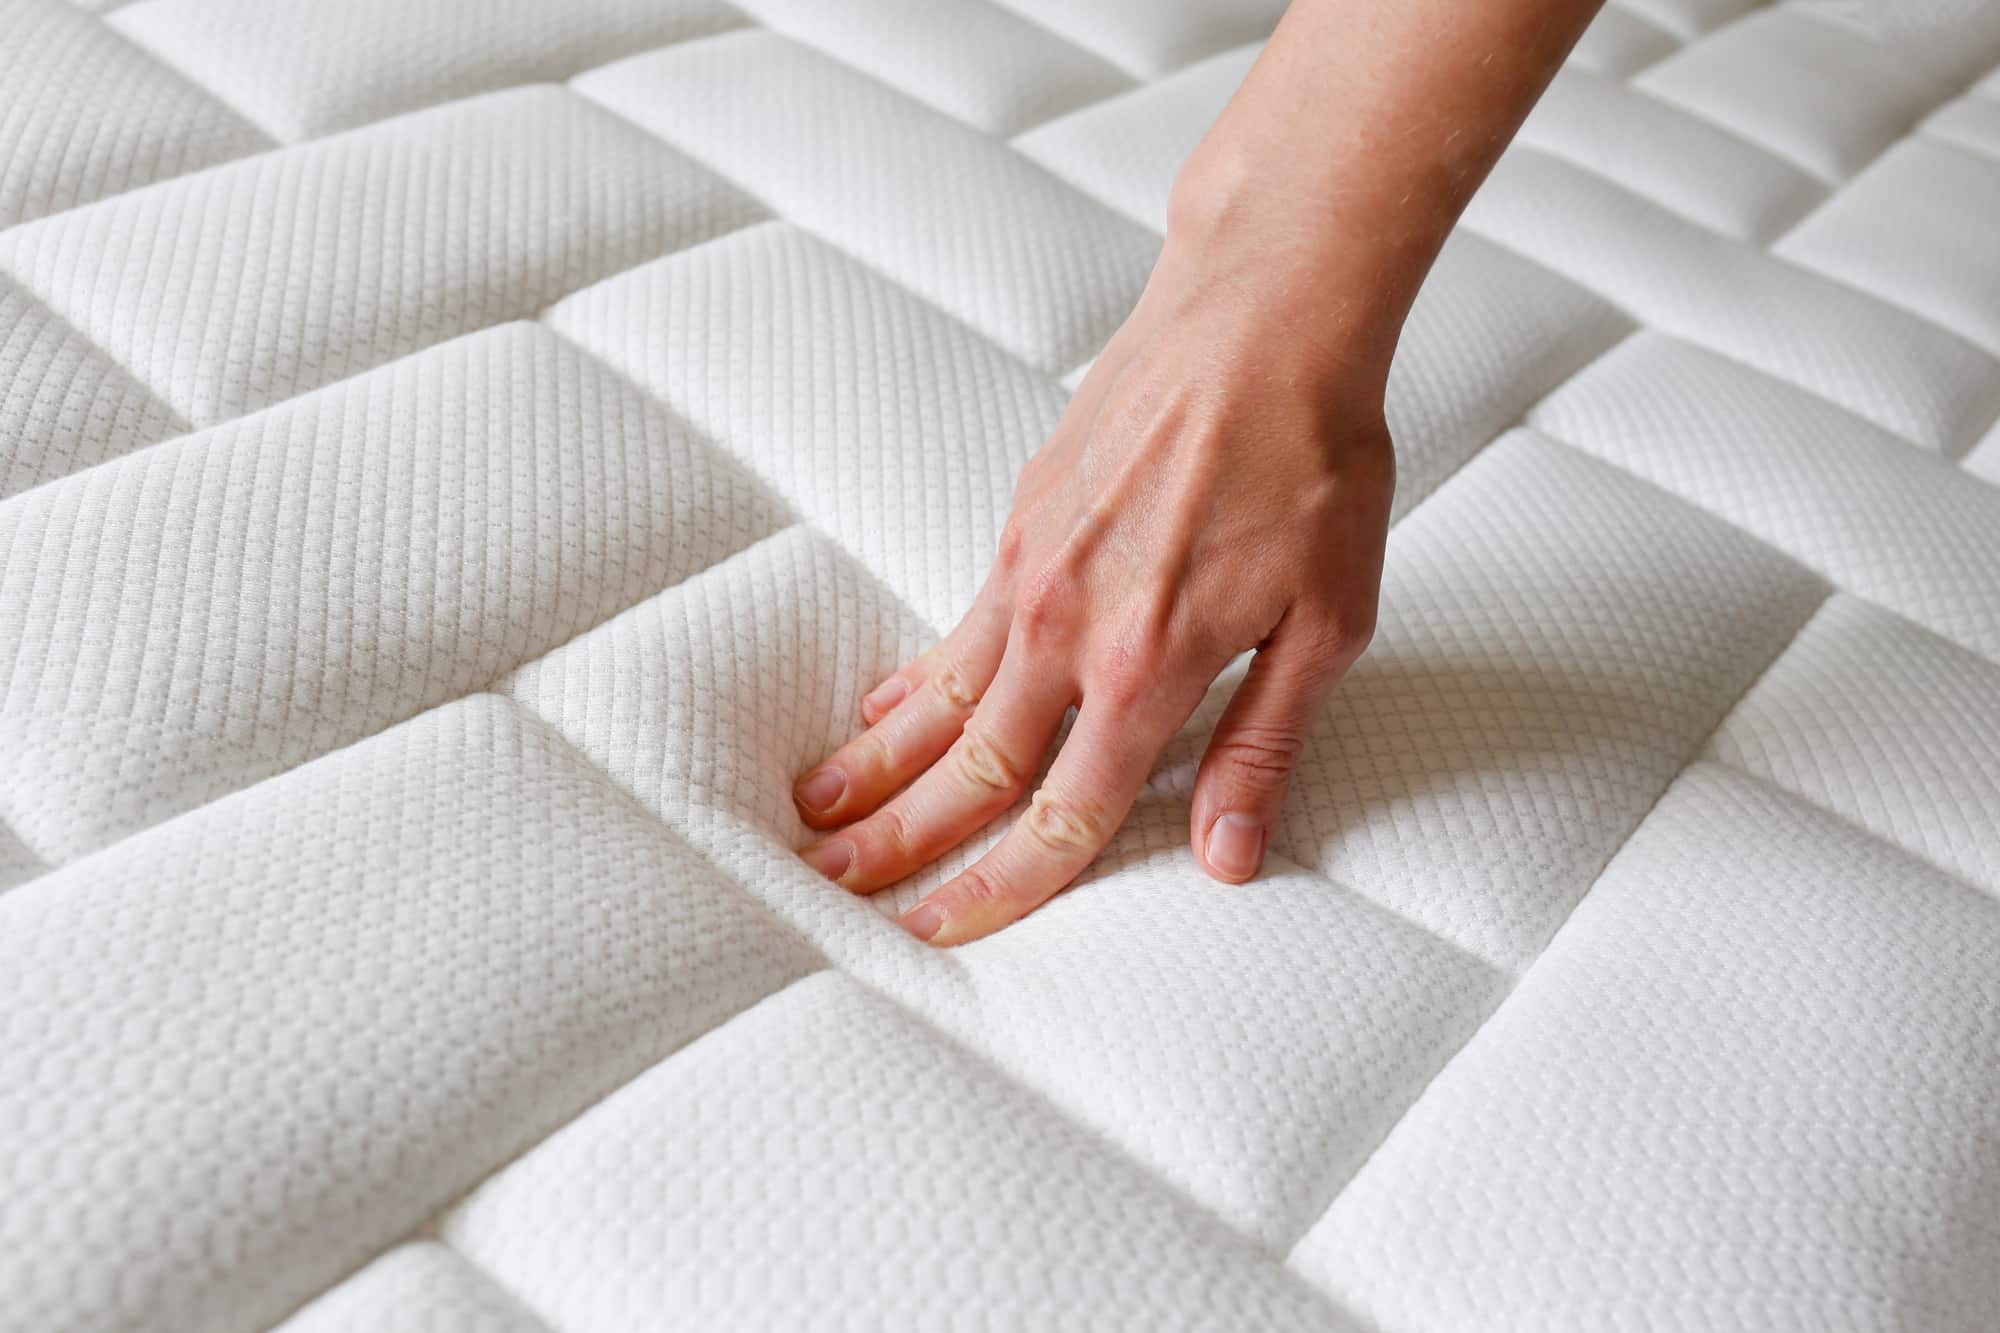 How To Customize Your Mattress